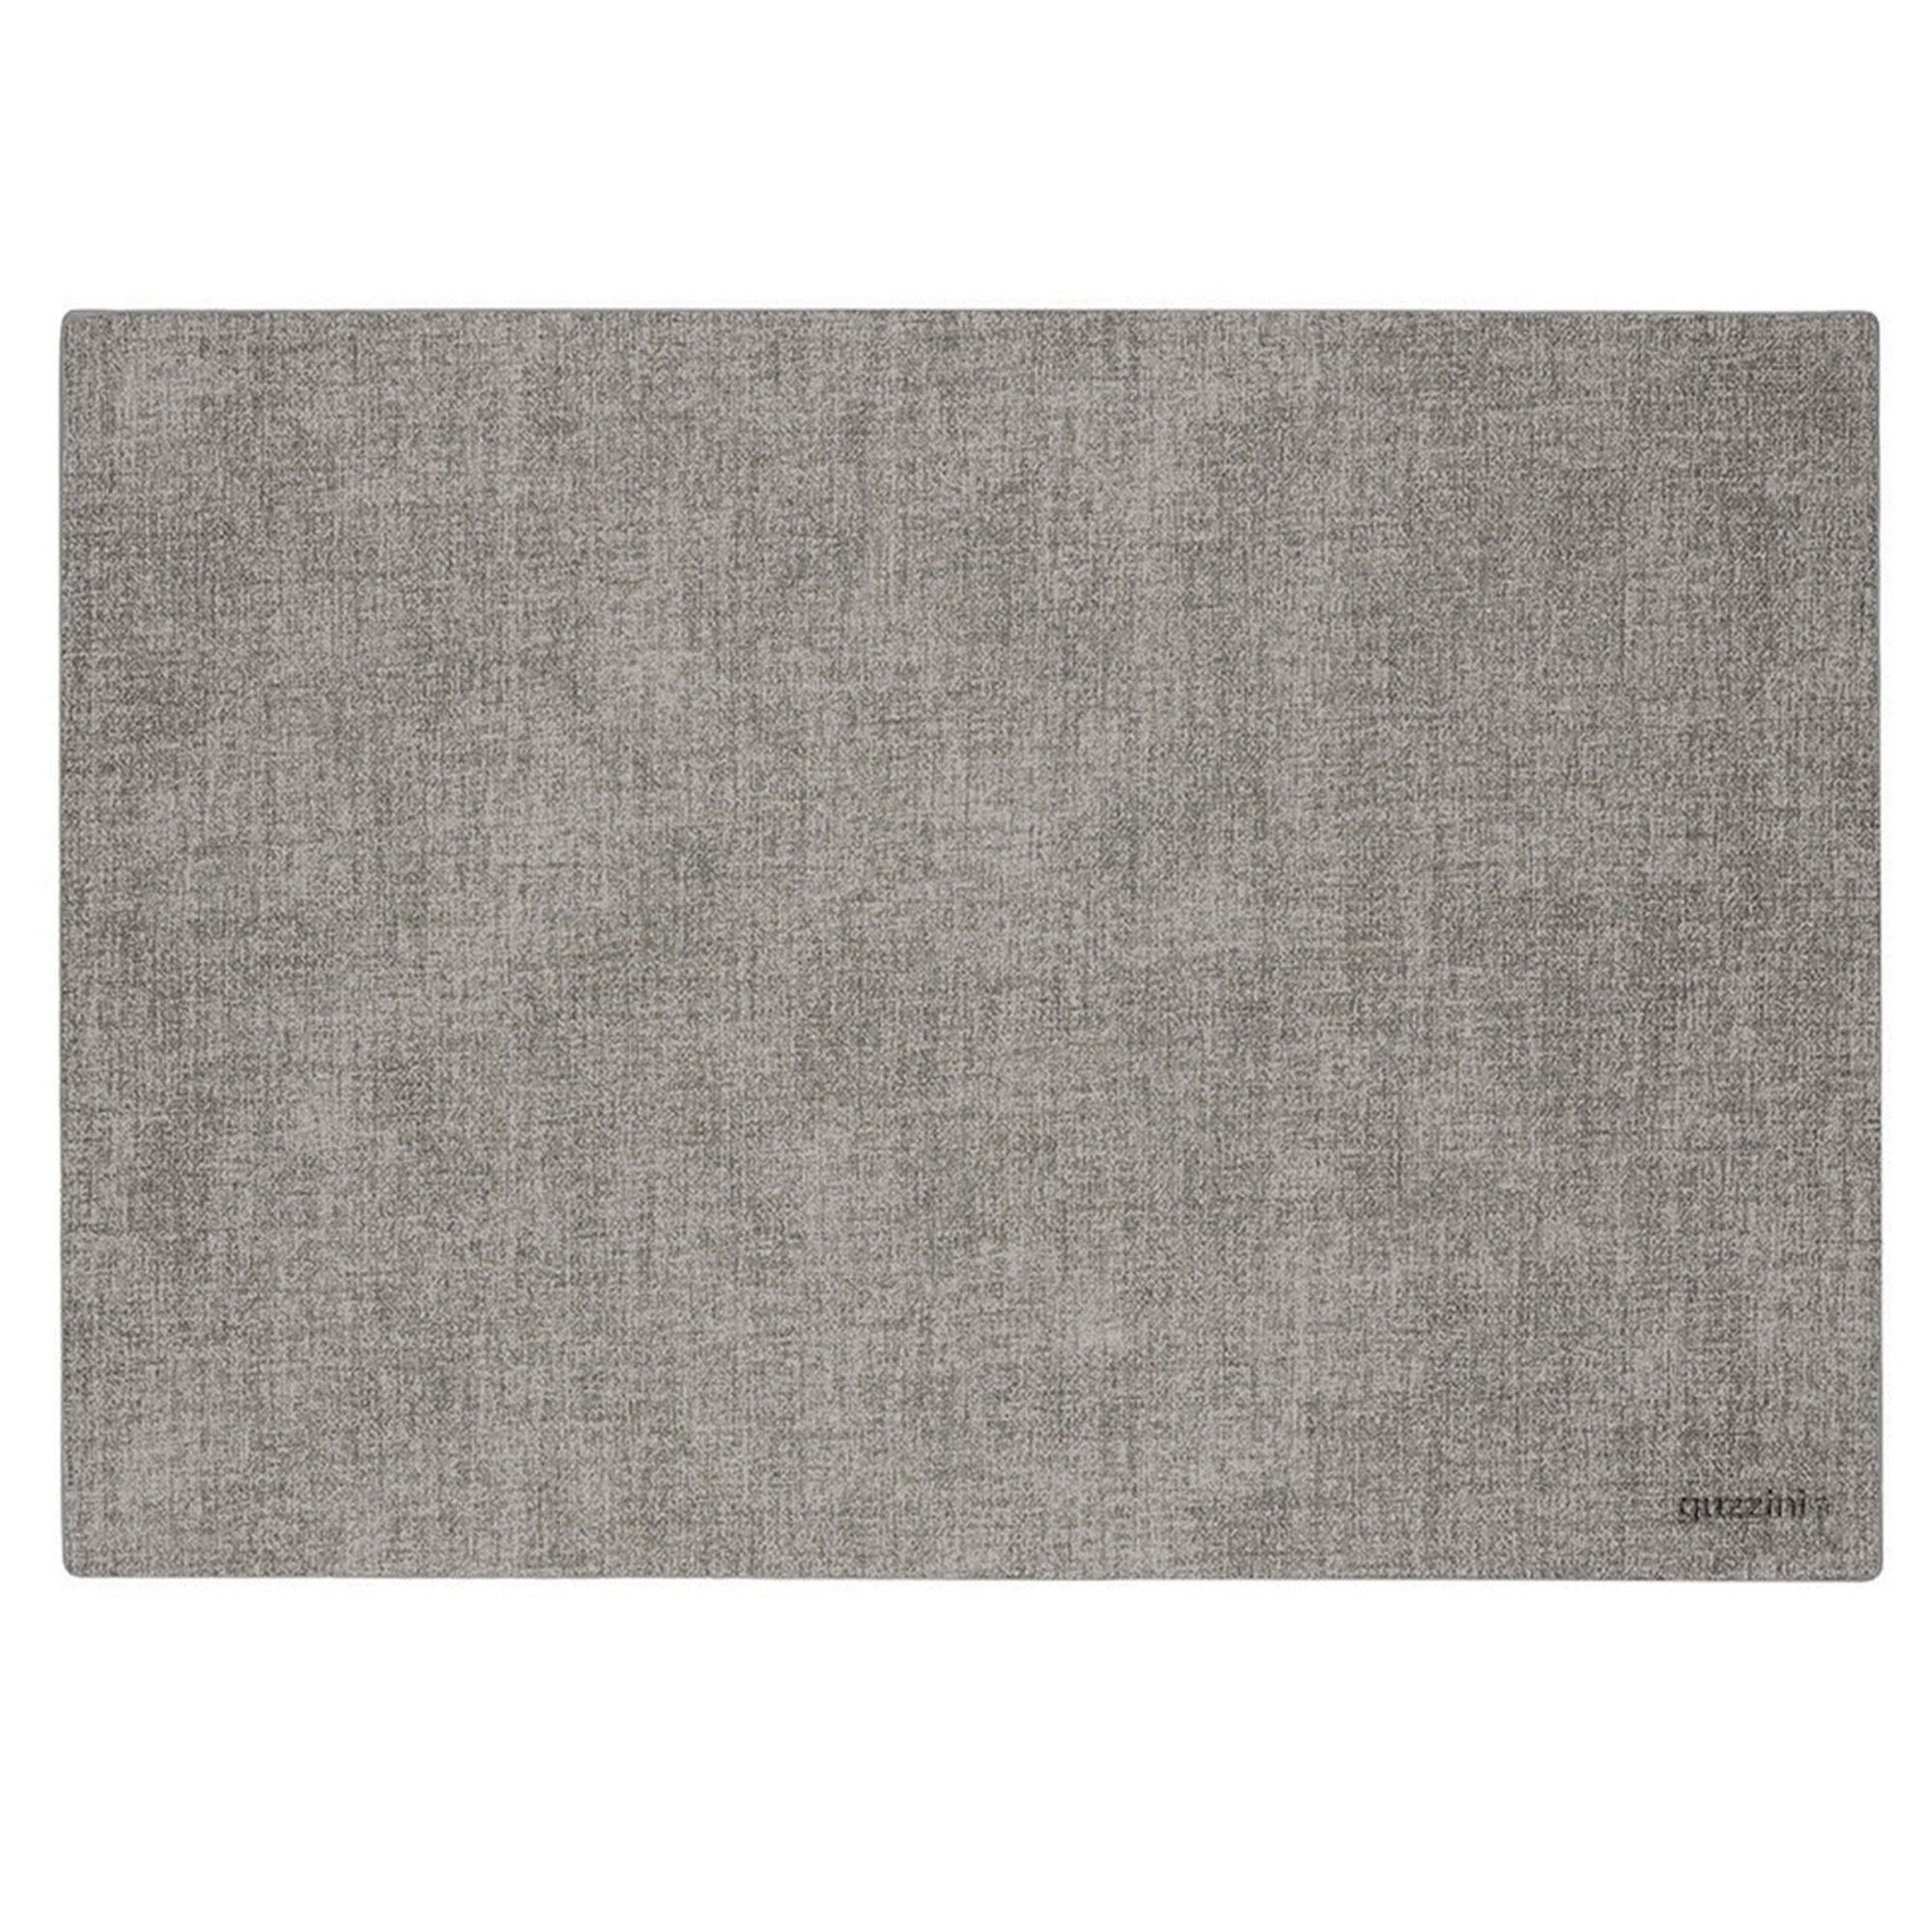 Tiffany Reversible Placemat - Sky Grey